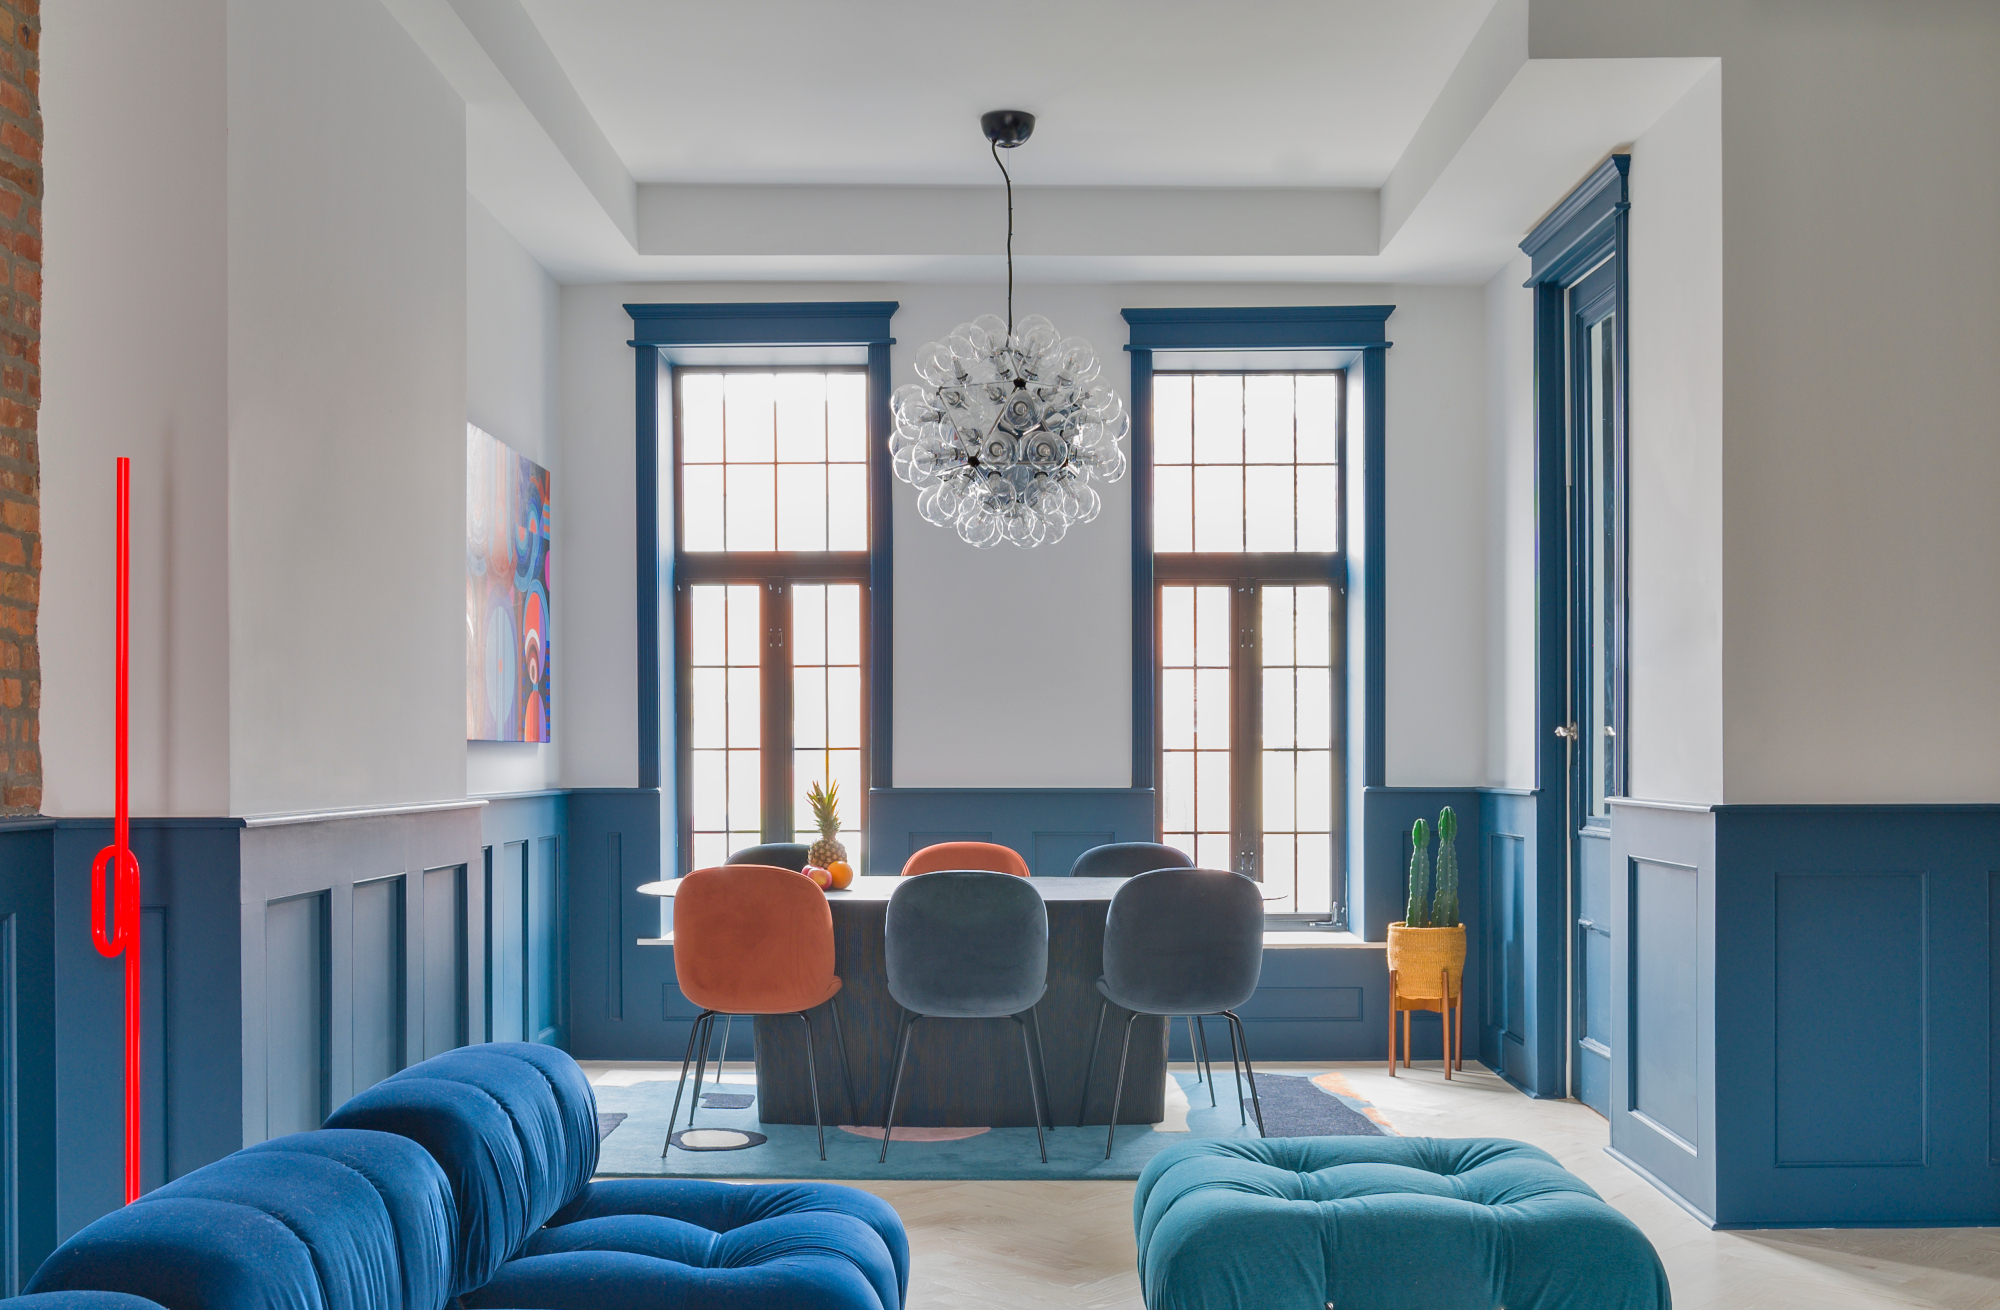 Living-dining room with blue panelled walls and bright blue sofa